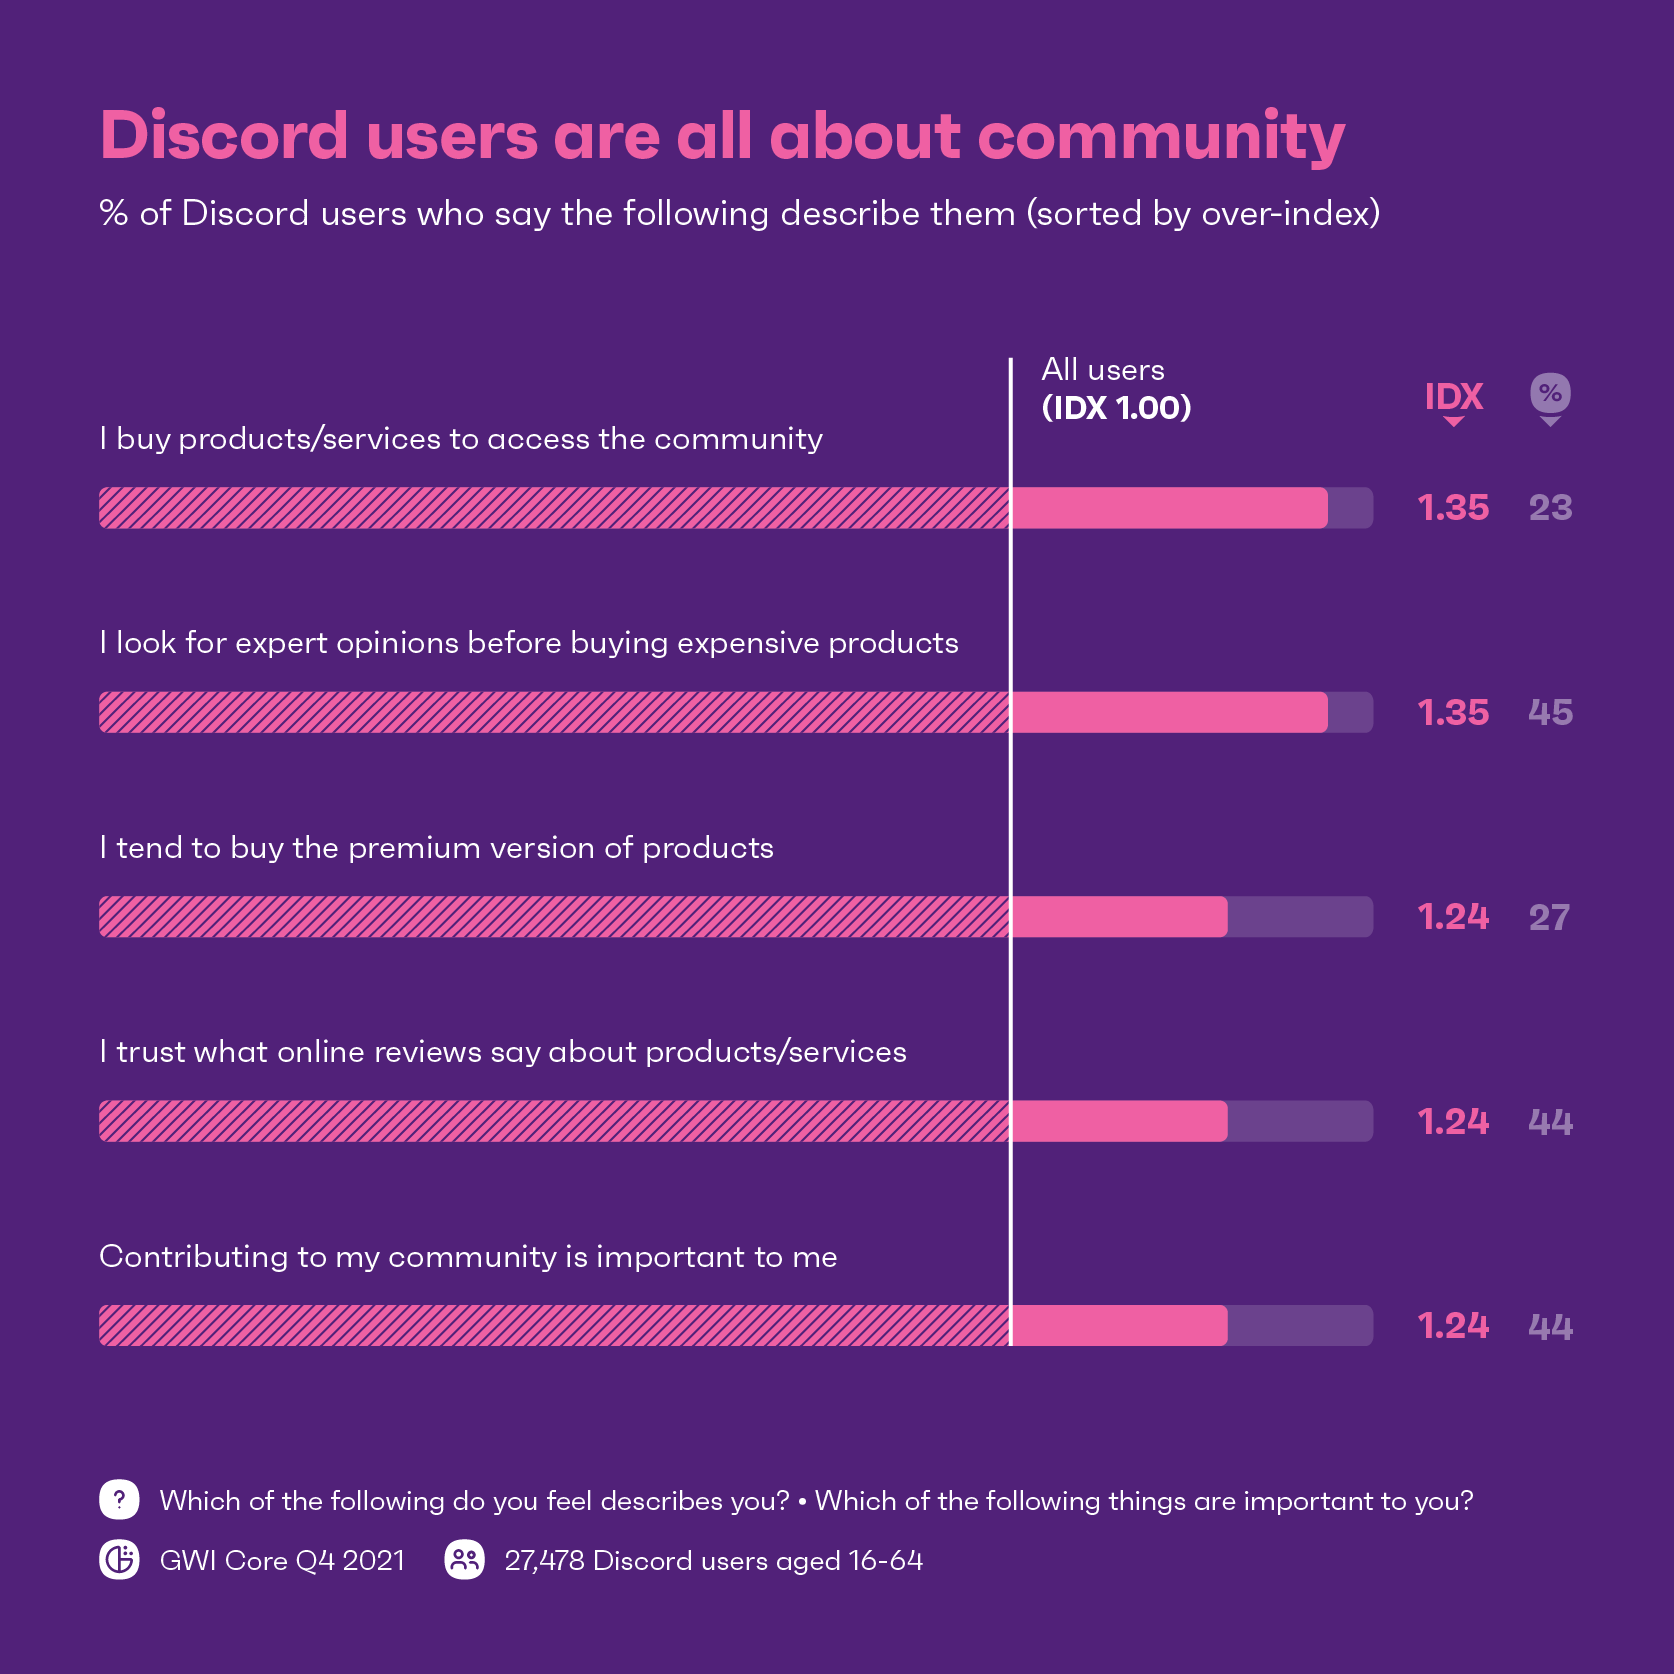 Chart showing important aspects to Discord users